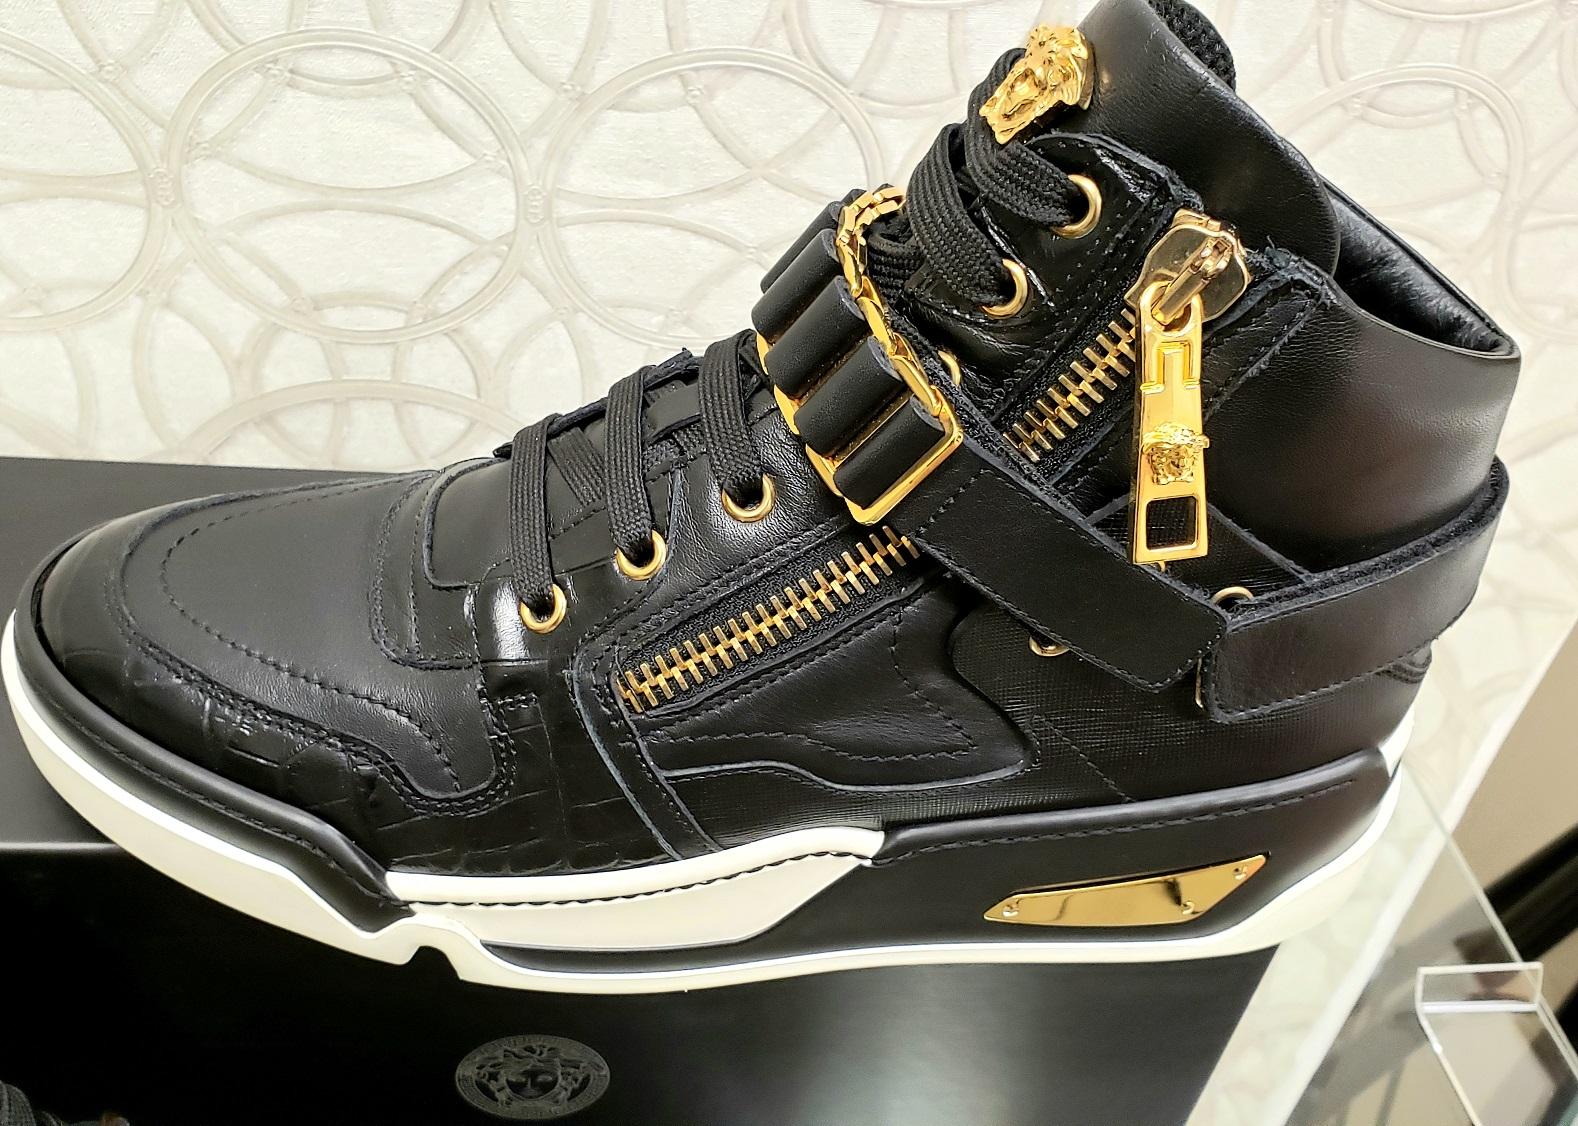 VERSACE BLACK LEATHER GOLD MEDUSA ZIPPER HIGH-TOP Fashion SNEAKERS 41 - 8 4